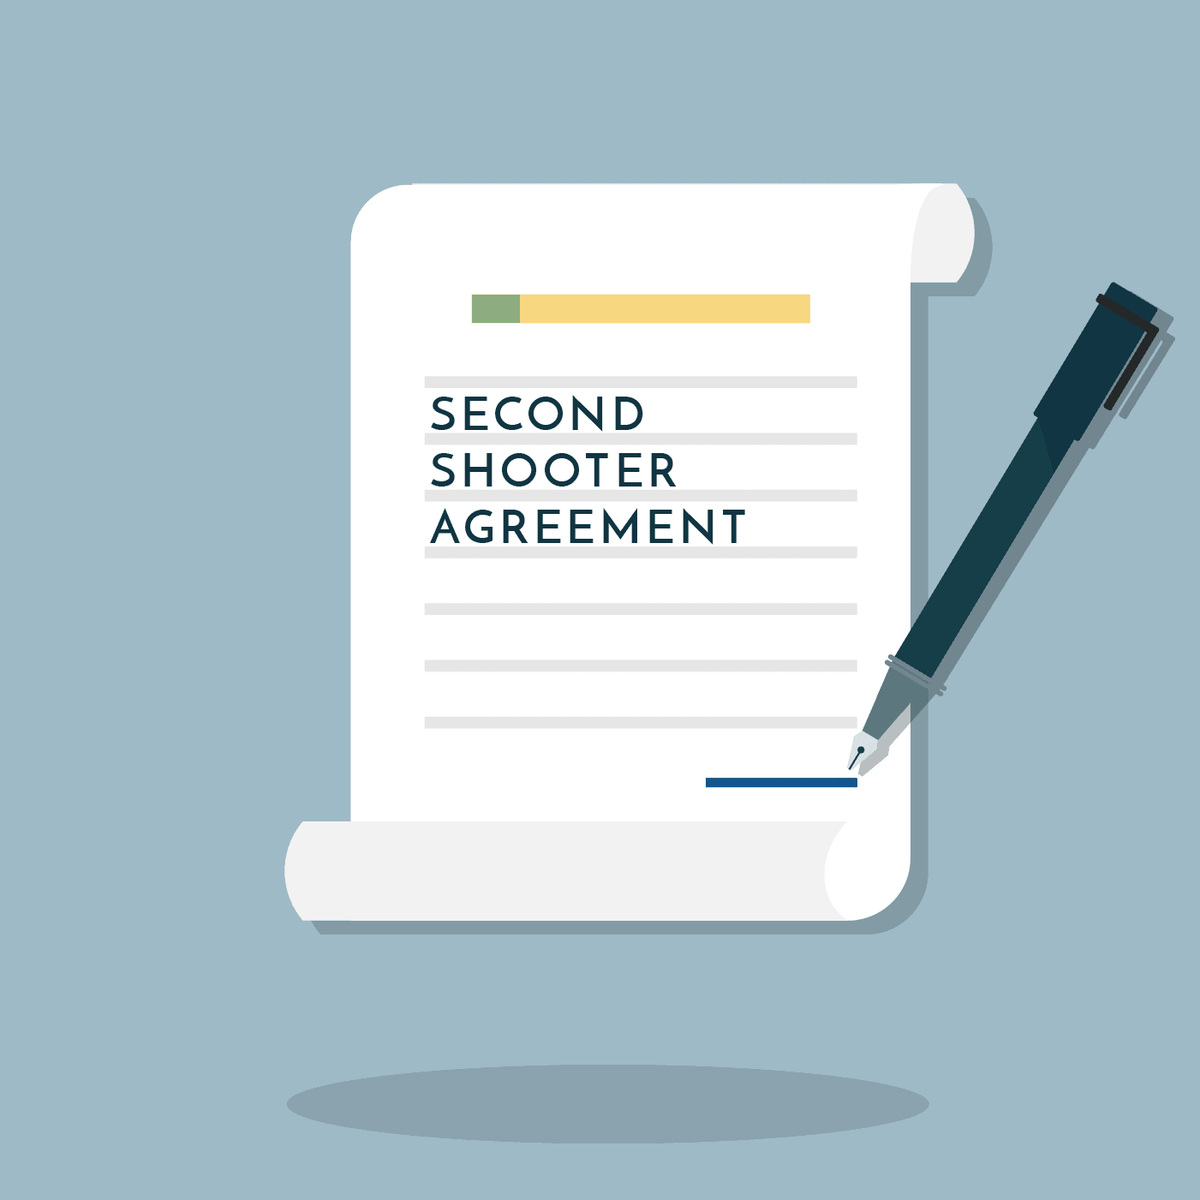 Second Shooter Agreement